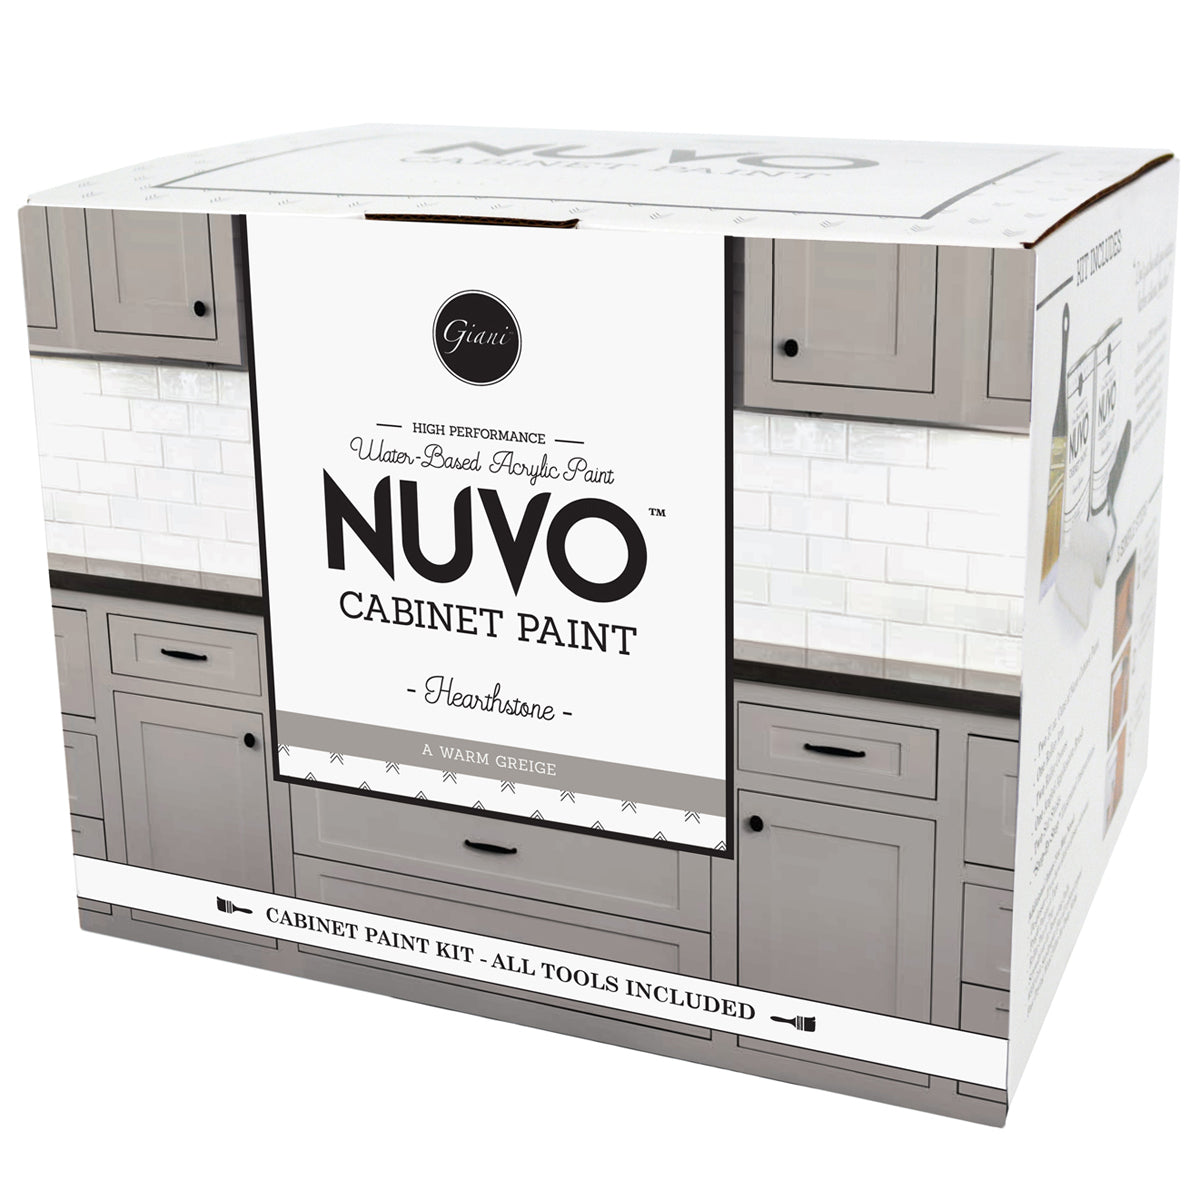 Nuvo Hearthstone Cabinet Paint Kit